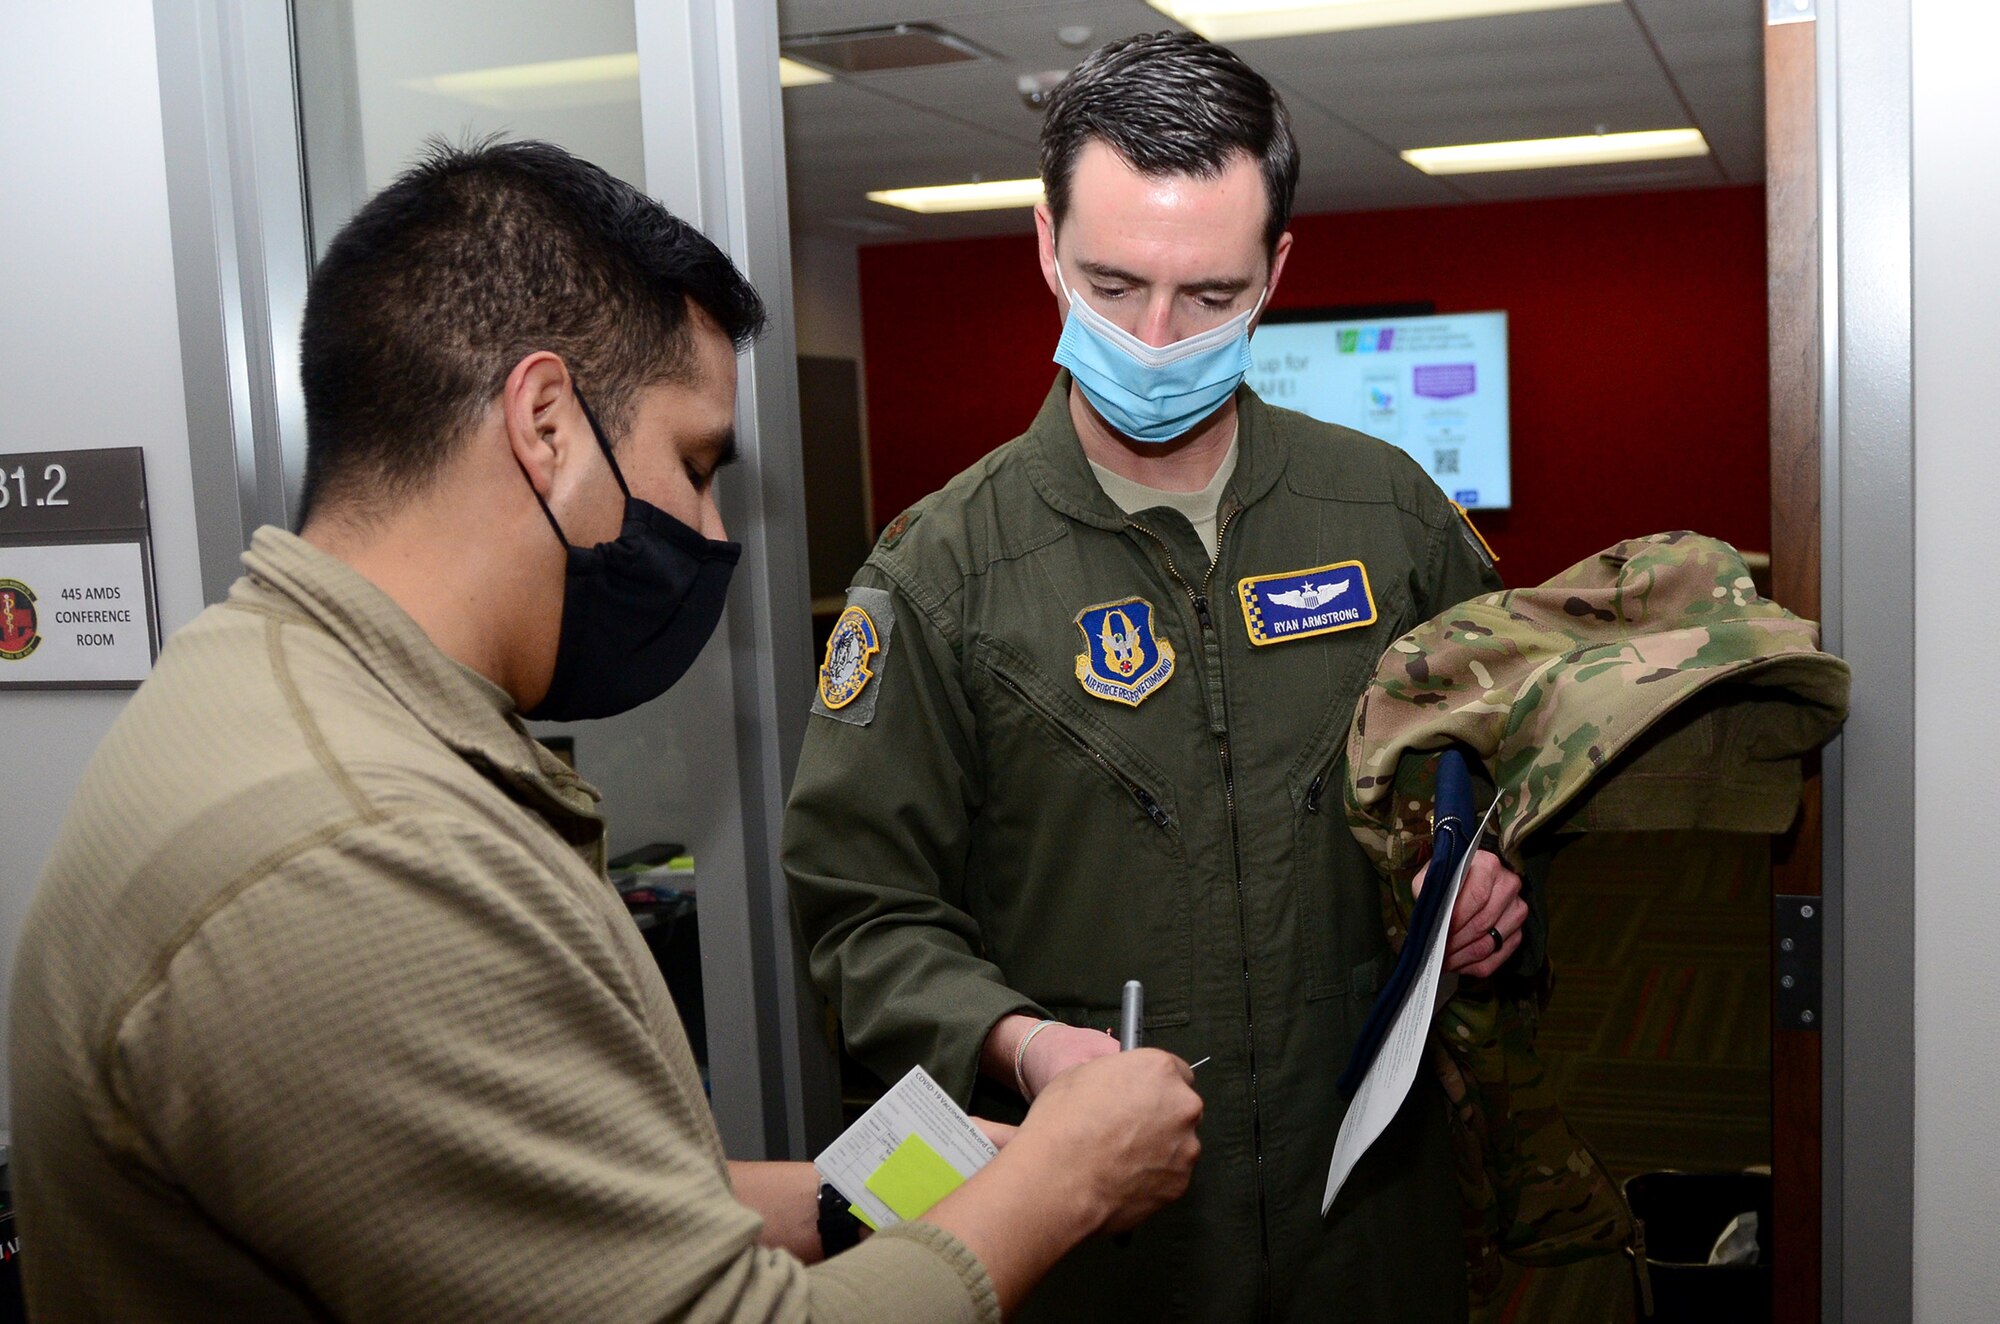 Master Sgt. Christian De La Cruz, 445th Aerospace Medicine Squadron aerospace medical technician, gives Maj. Ryan Armstrong, 89th Airlift Squadron C-17 pilot, a COVID-19 vaccination record card Feb. 26, 2021. De La Cruz also provided a sticky note with the time the vaccine was administered for evaluation purposes. AMDS staff members monitored each Airman for development of side effects. The two-dose vaccine was recently approved by the Food and Drug Administration under an emergency use authorization and are currently offered to Defense Department personnel on a voluntary basis. (U.S. Air Force photo/Mr. Darrell Sydnor)